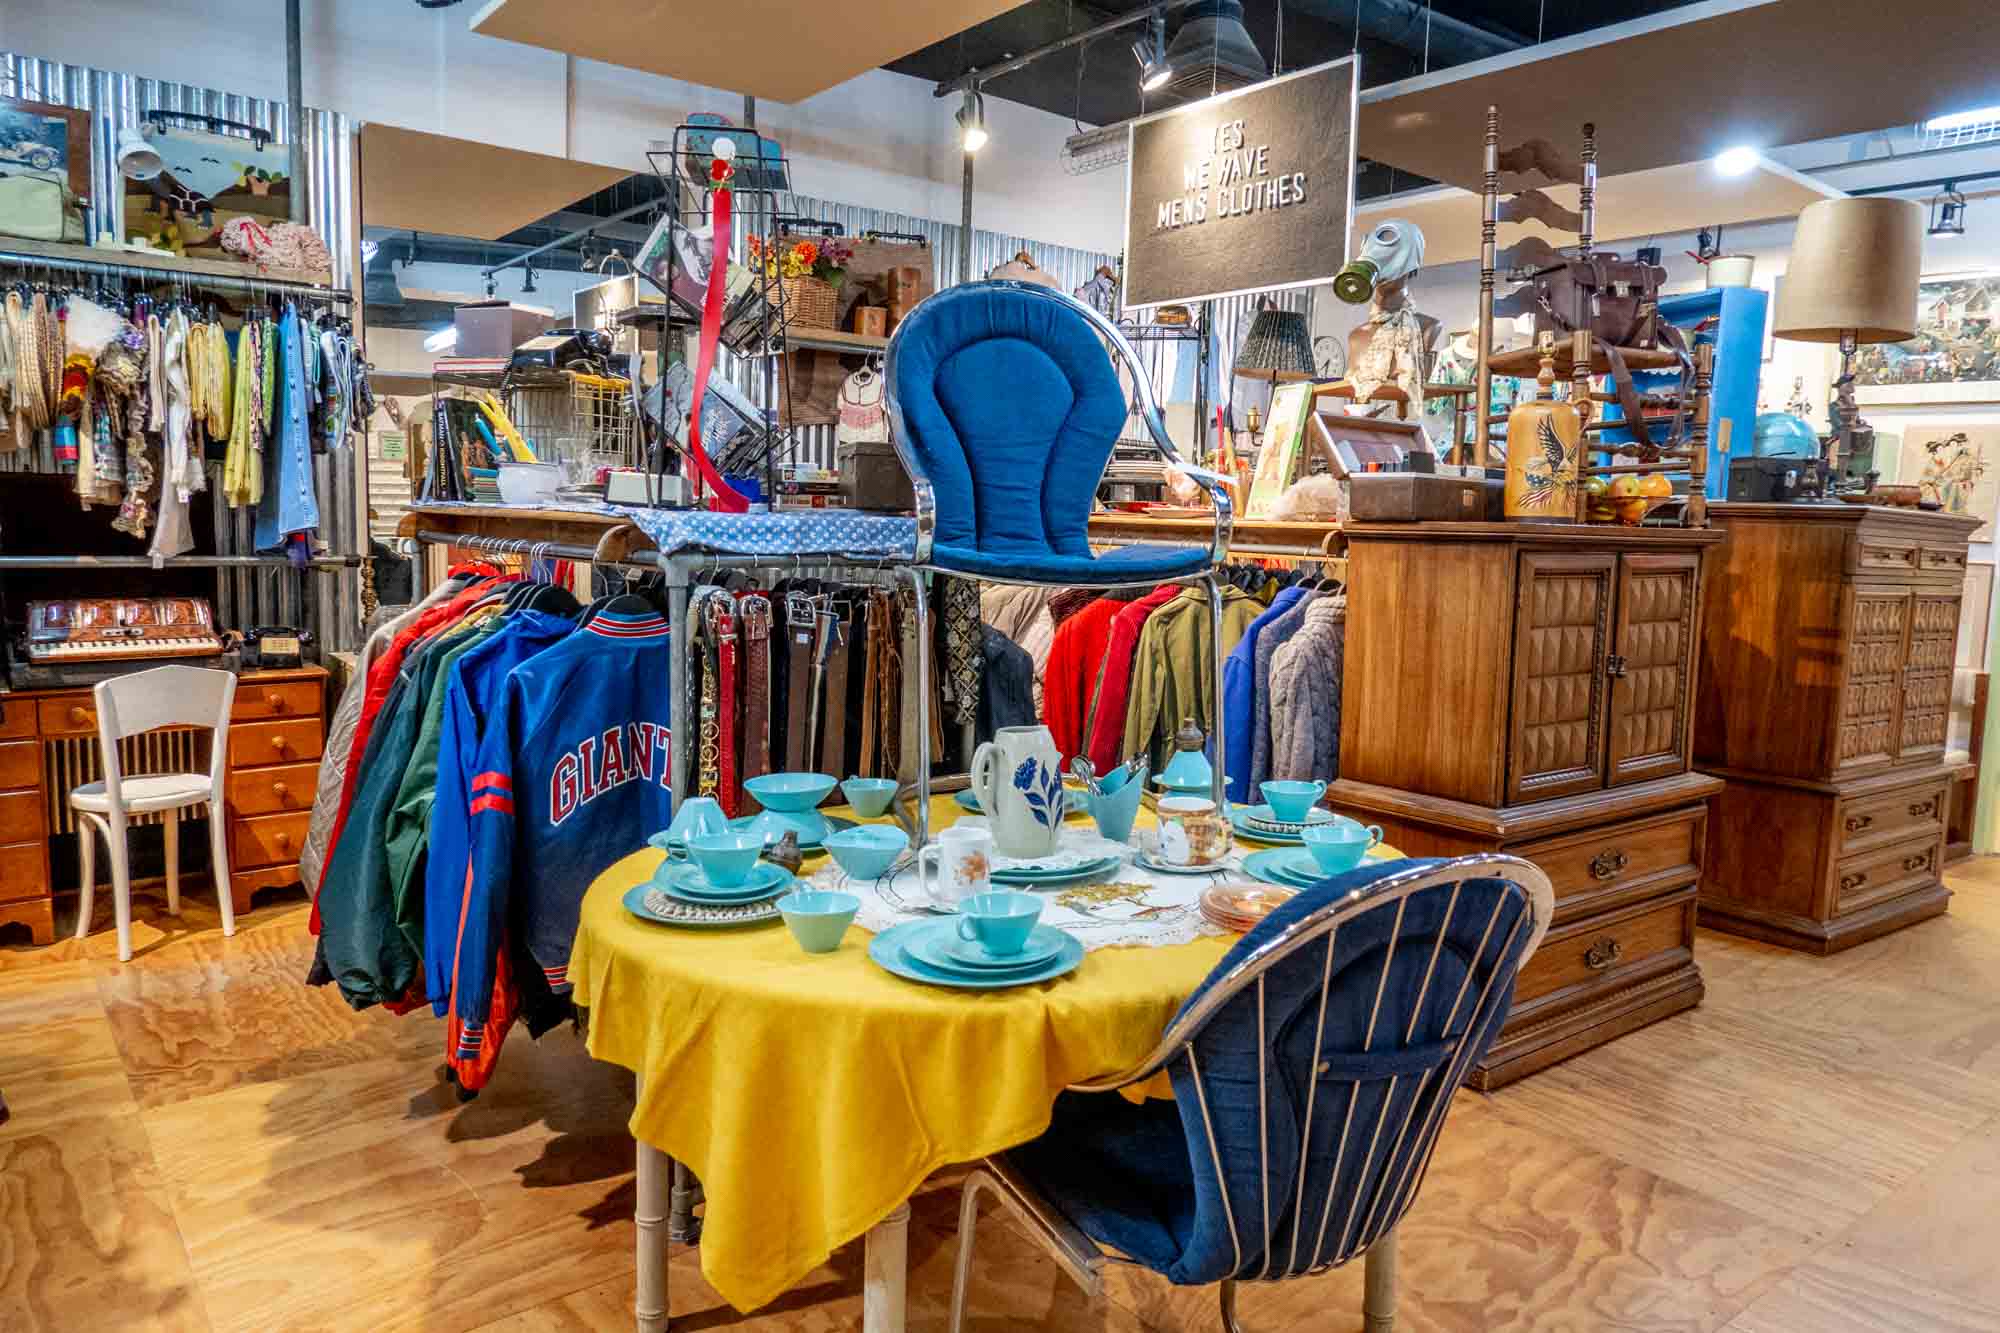 Display of table with dishes and clothes from a vintage shop